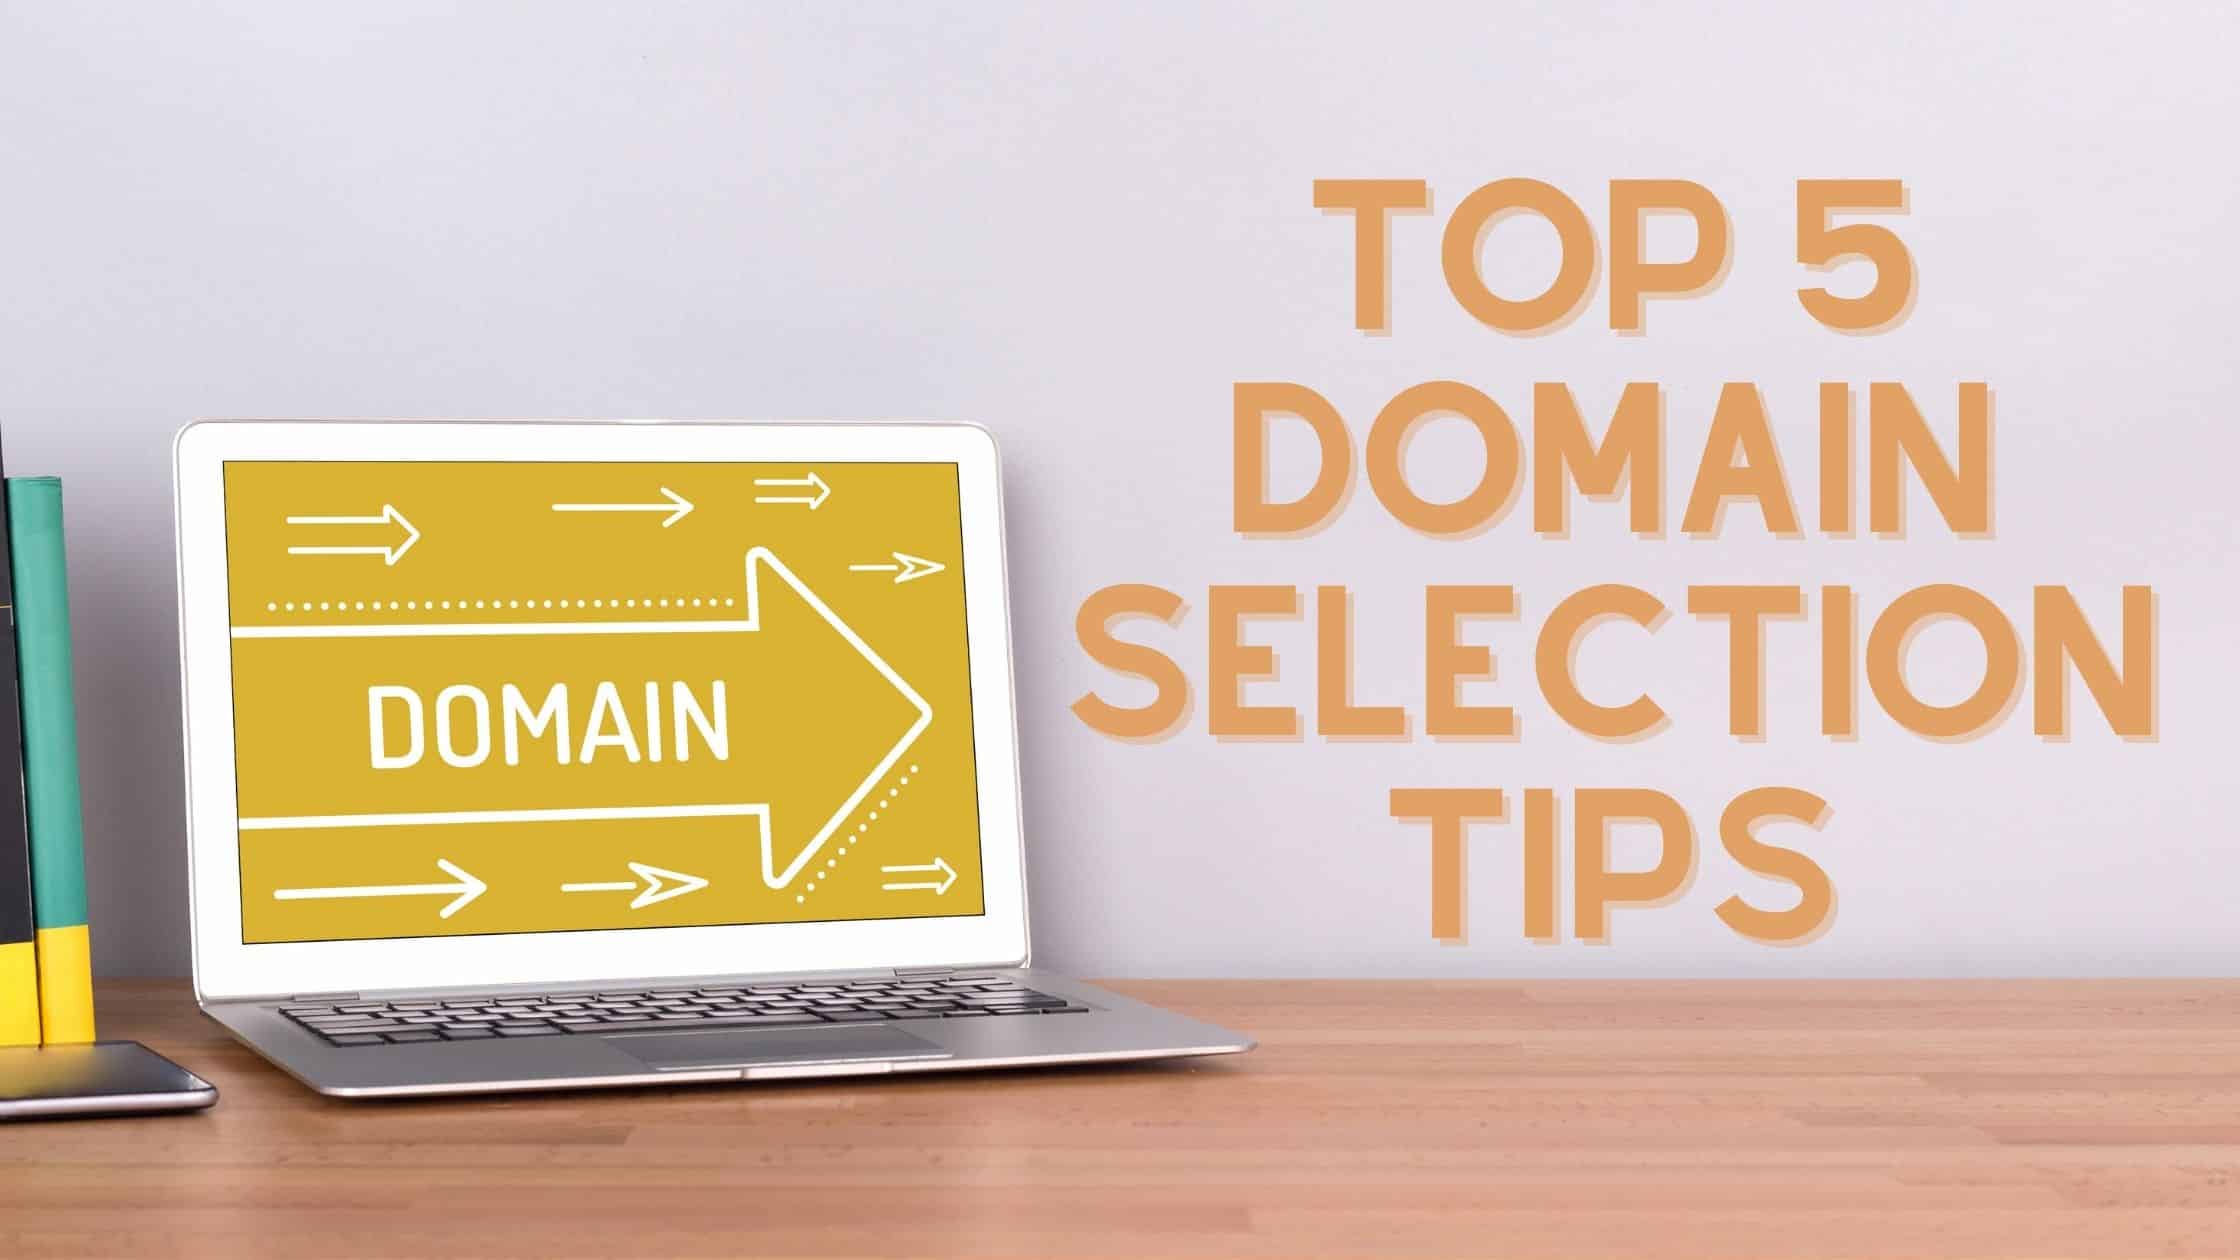 Top 5 Domain Selection Tips for Beginners - Choose Best Domain Name for Blogging